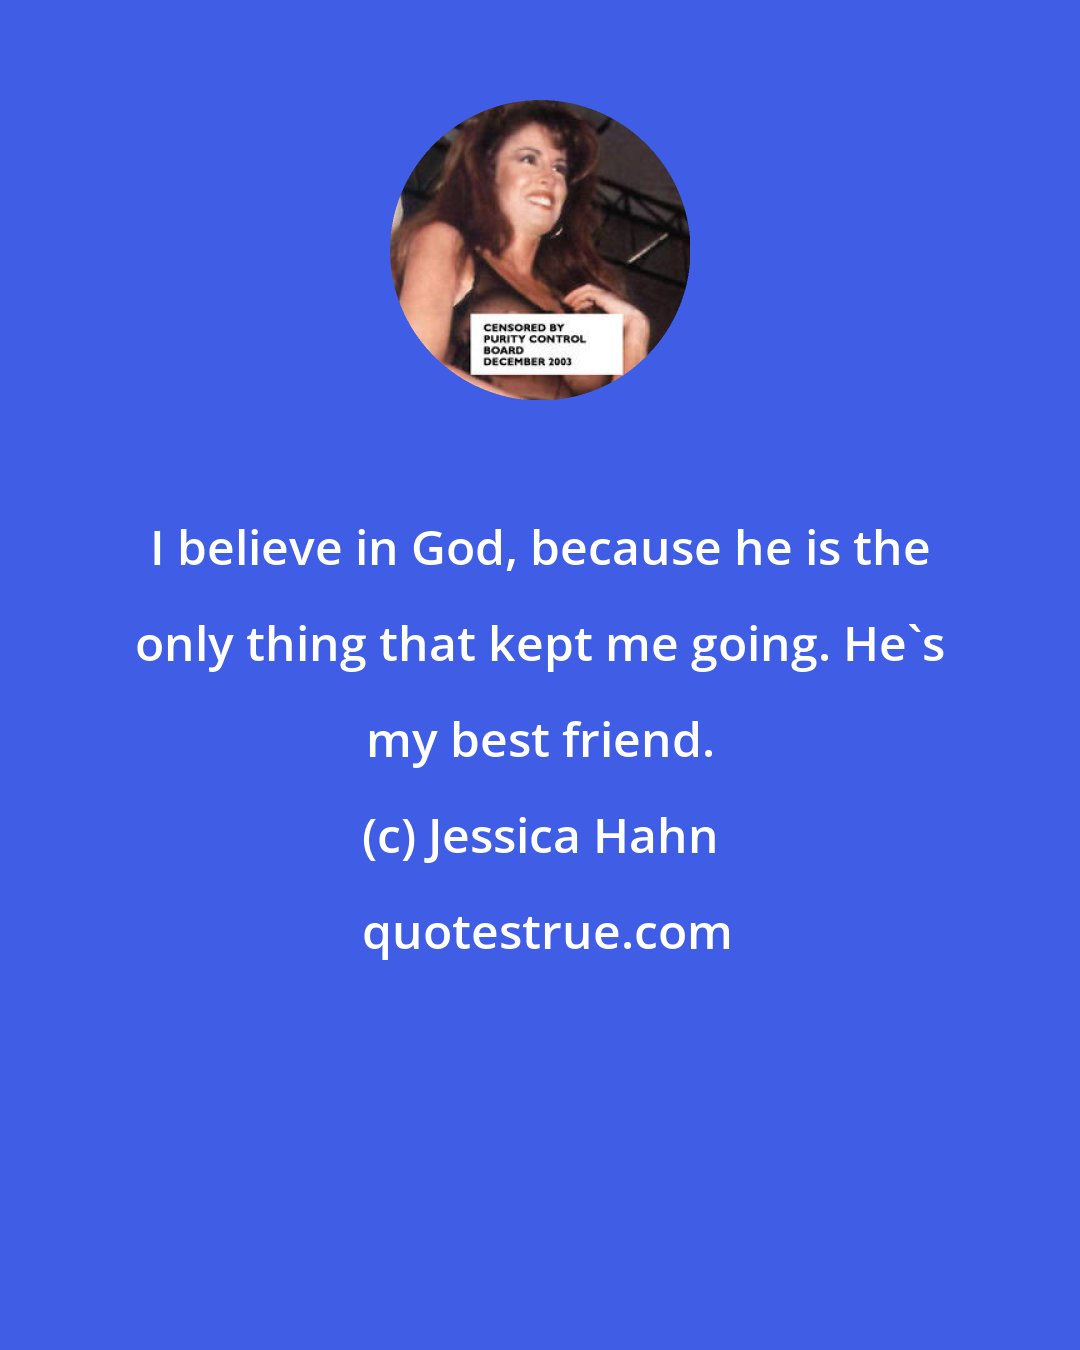 Jessica Hahn: I believe in God, because he is the only thing that kept me going. He's my best friend.